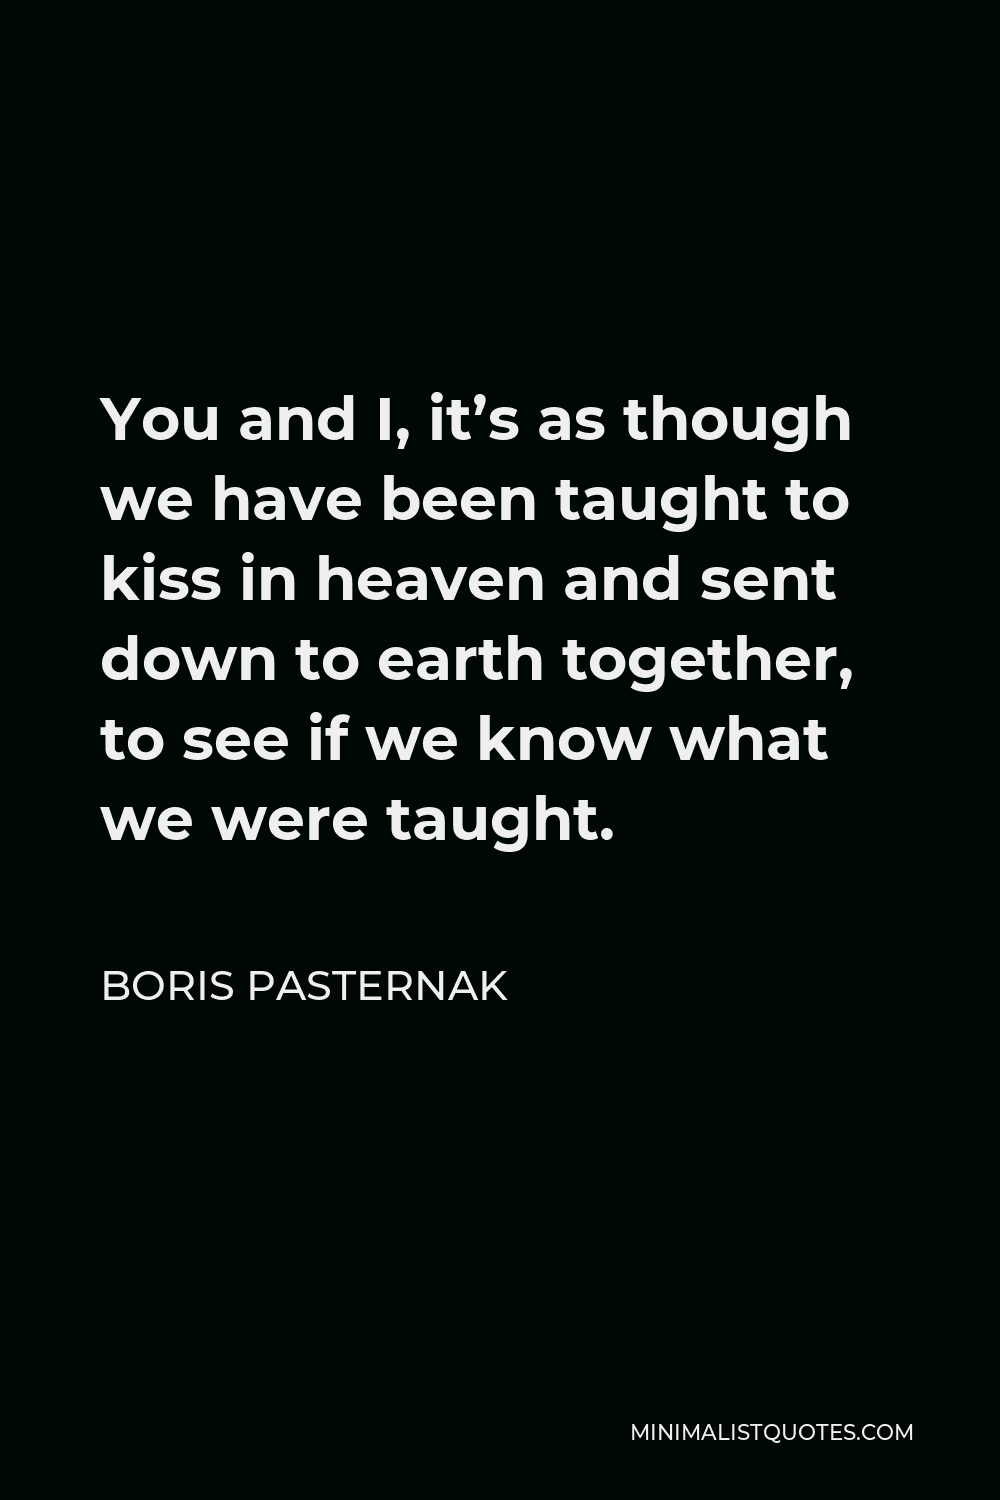 Boris Pasternak Quote - You and I, it’s as though we have been taught to kiss in heaven and sent down to earth together, to see if we know what we were taught.